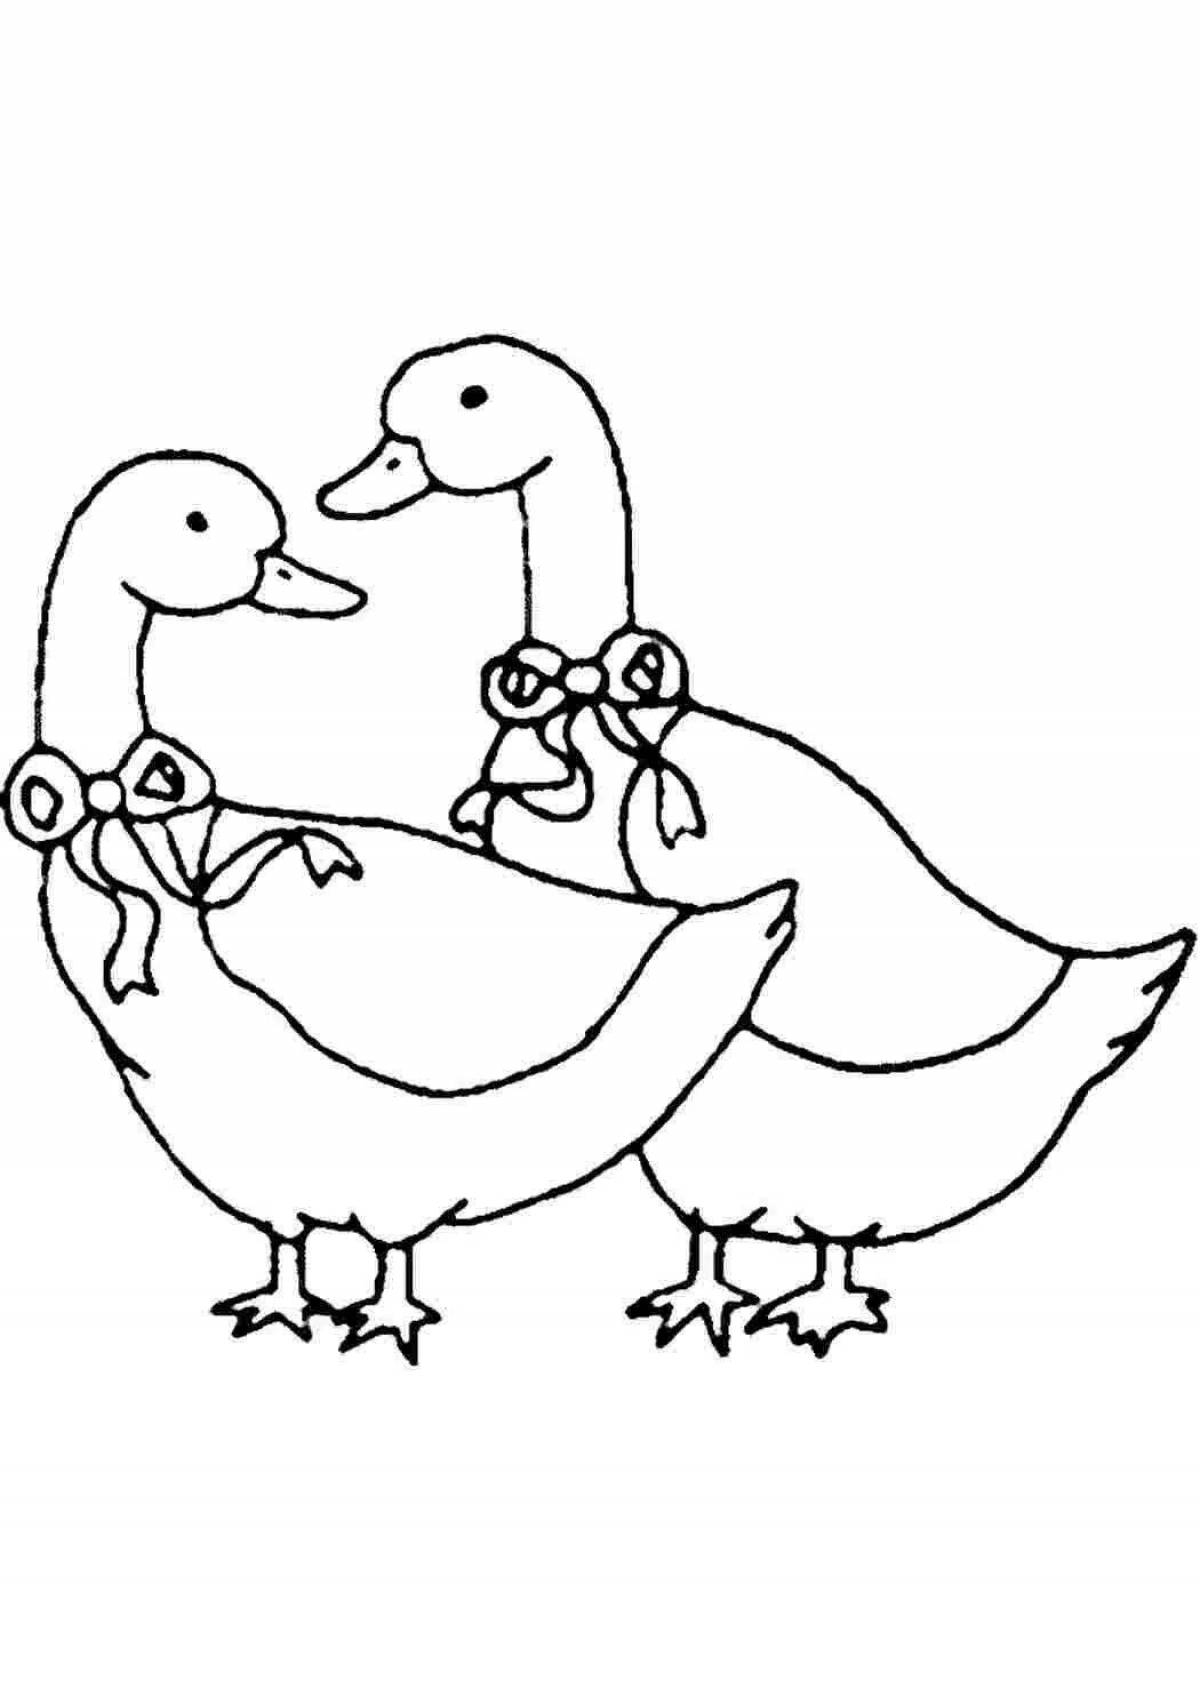 Nice geese coloring pages for girls